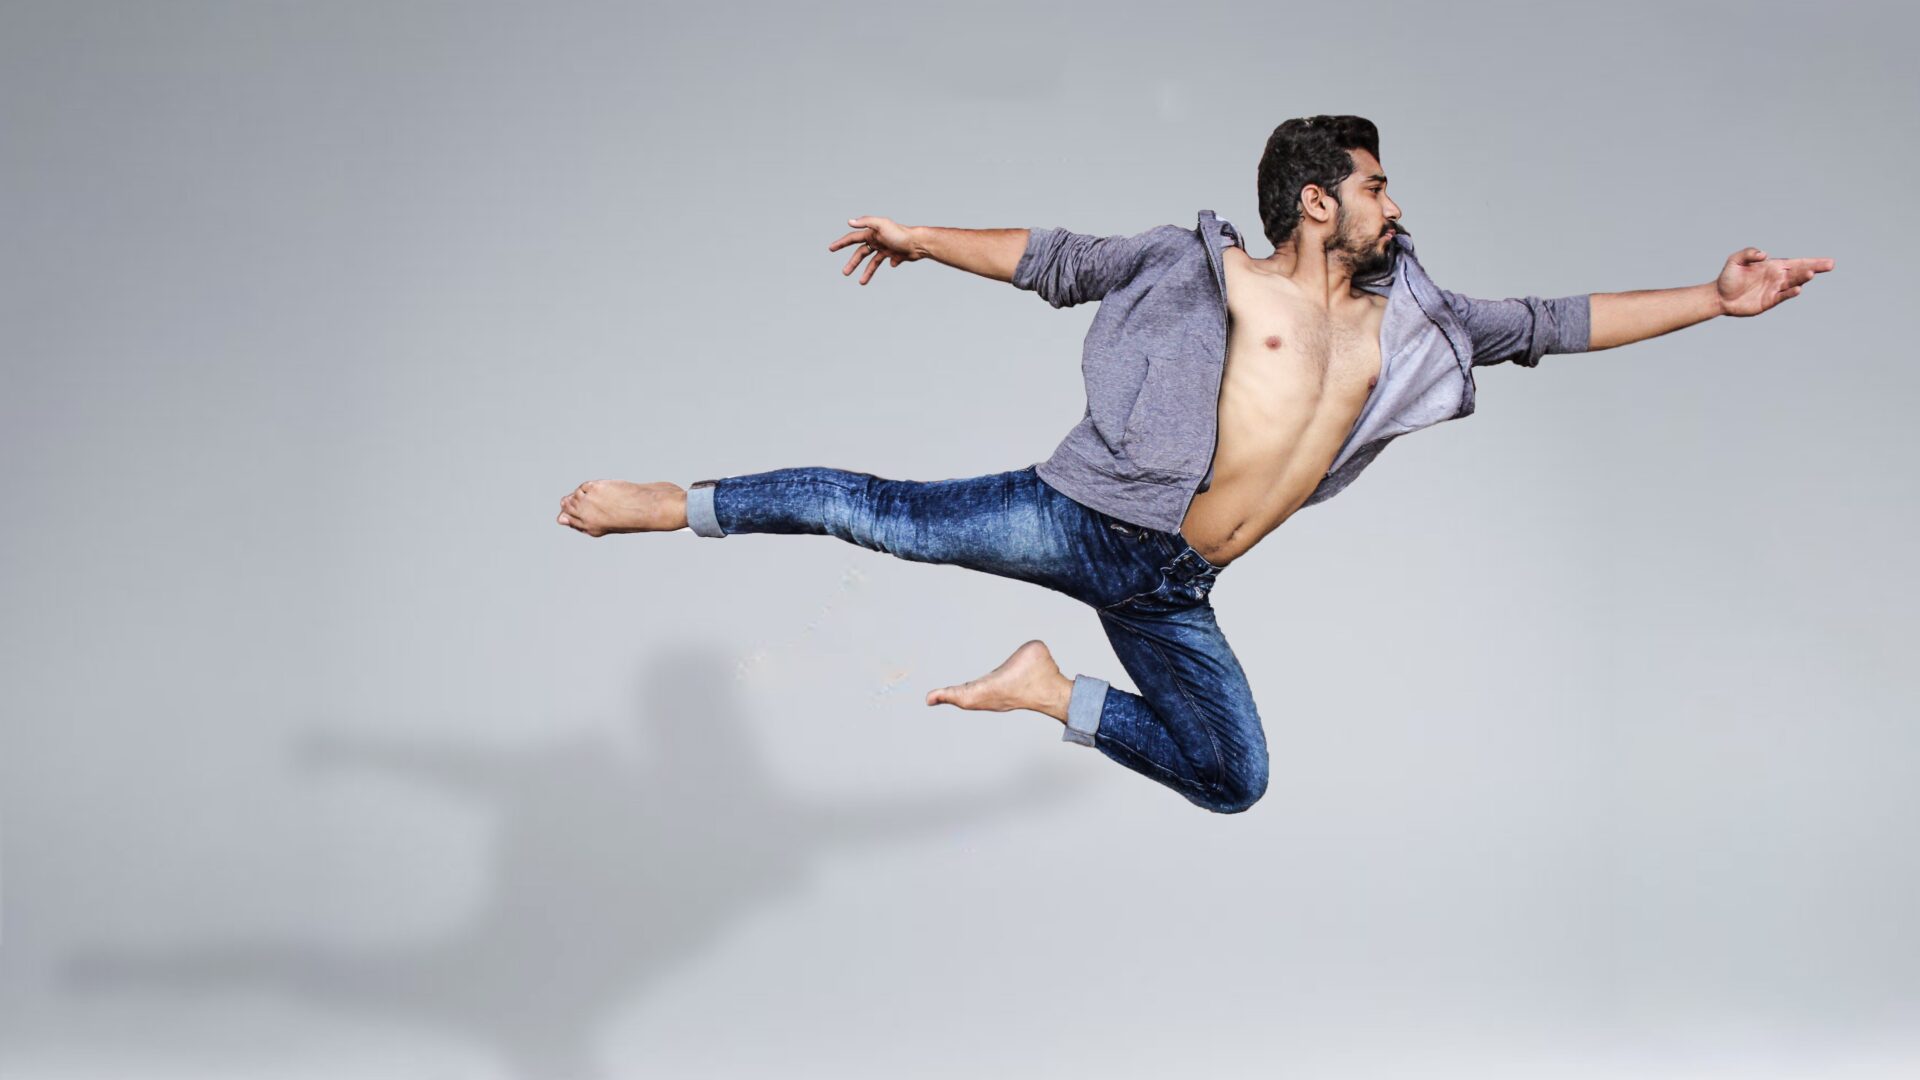 Man leaping through the air like a ballet dancer (Photo by Yogendra Singh from Pexels)